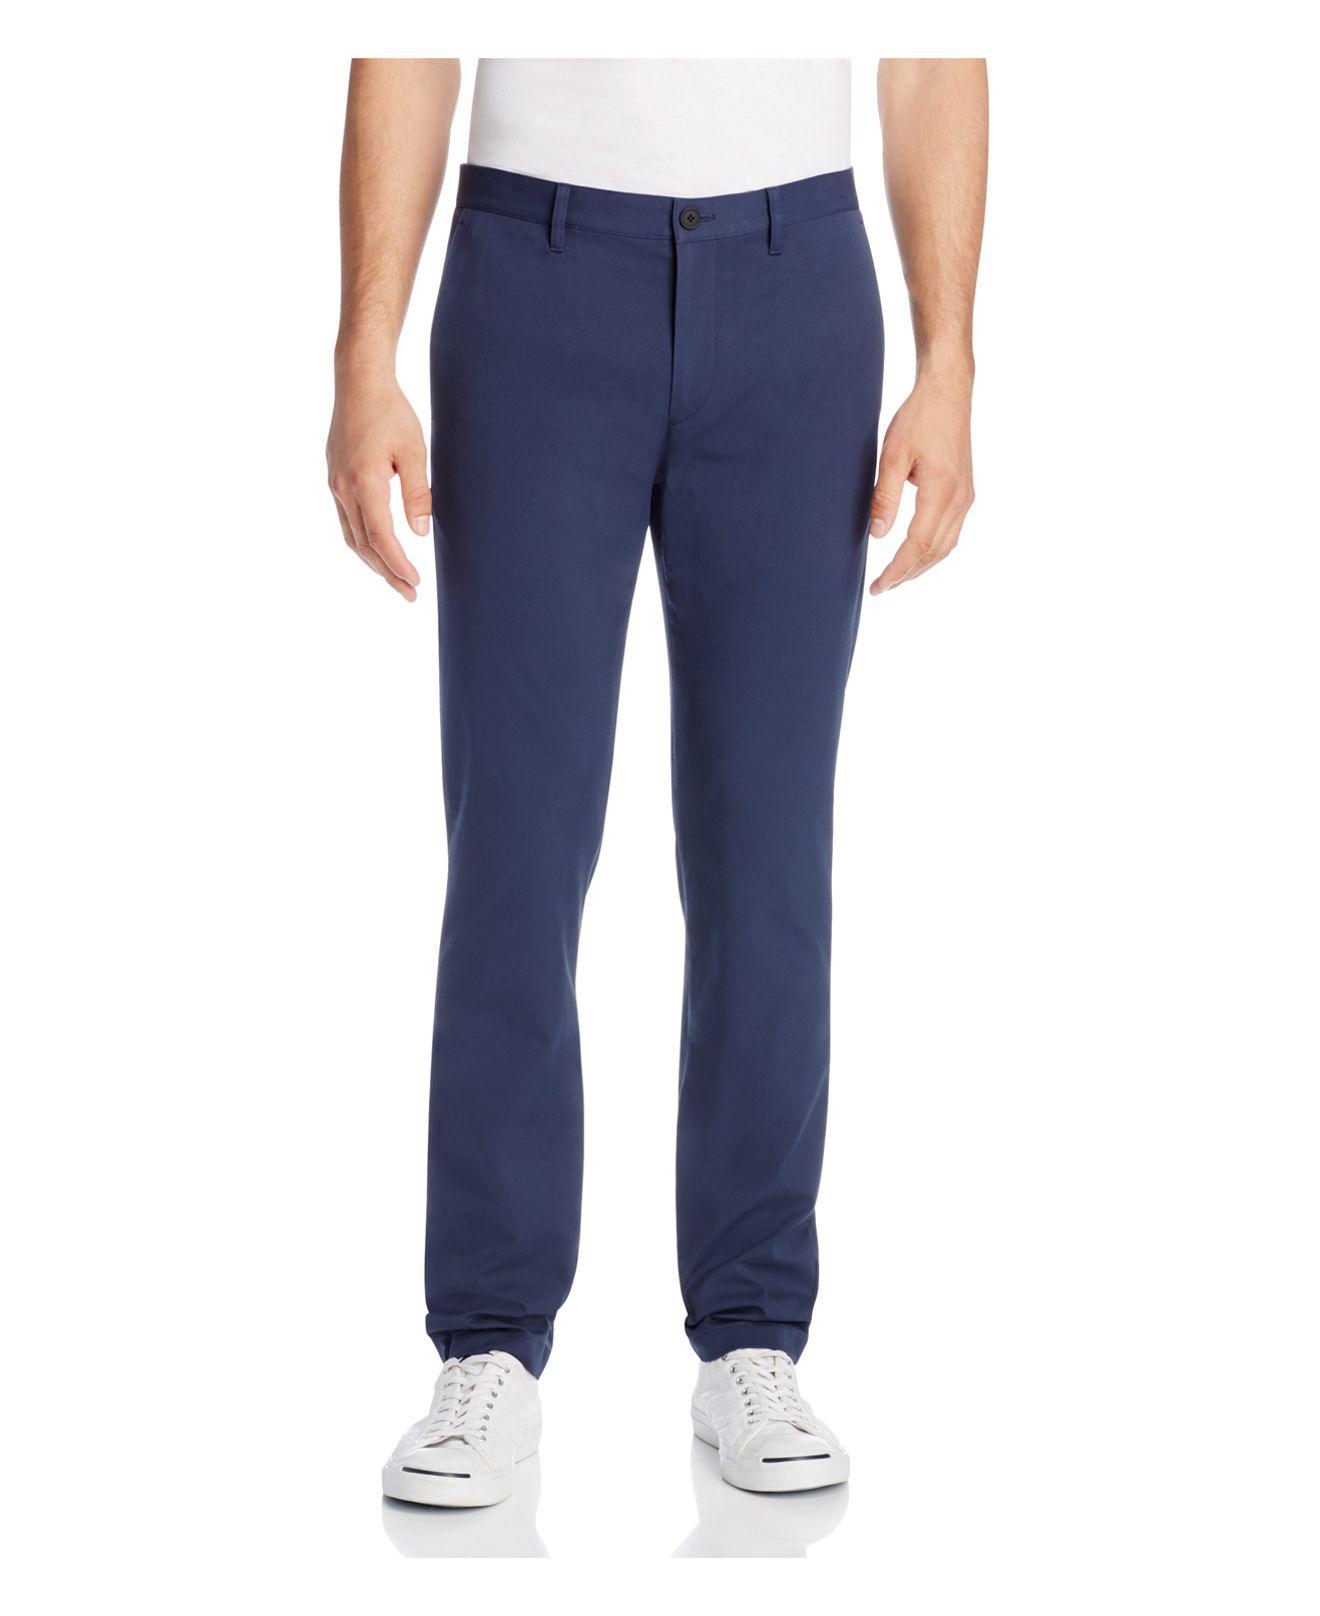 Lyst - Theory Zaine Neoteric Slim Fit Pants in Blue for Men